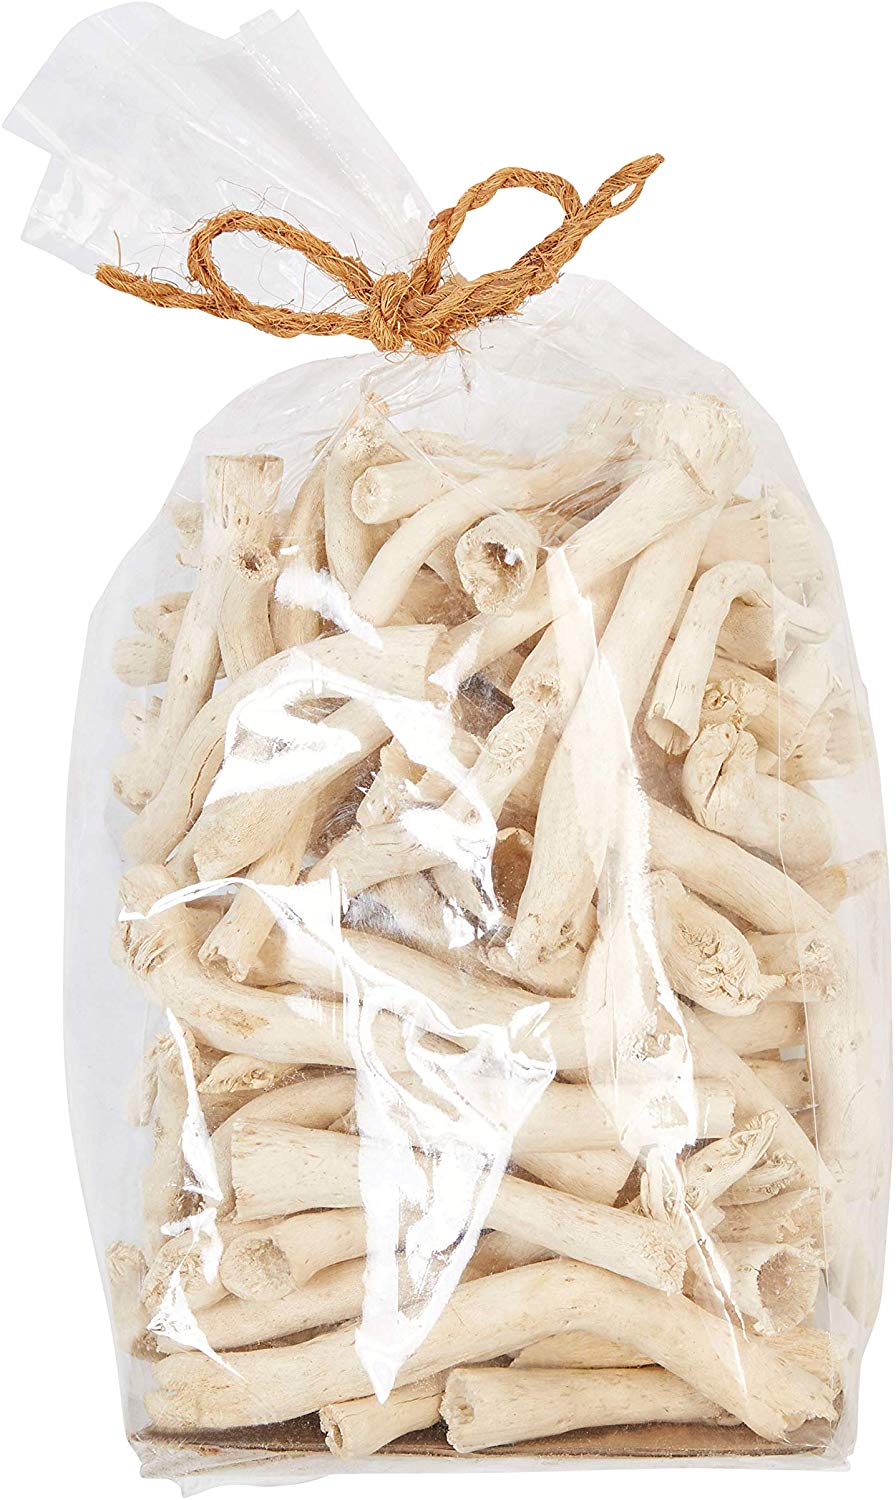 Natural Root in Bag, Bleached Dried Cauliflower, White - Mellow Monkey